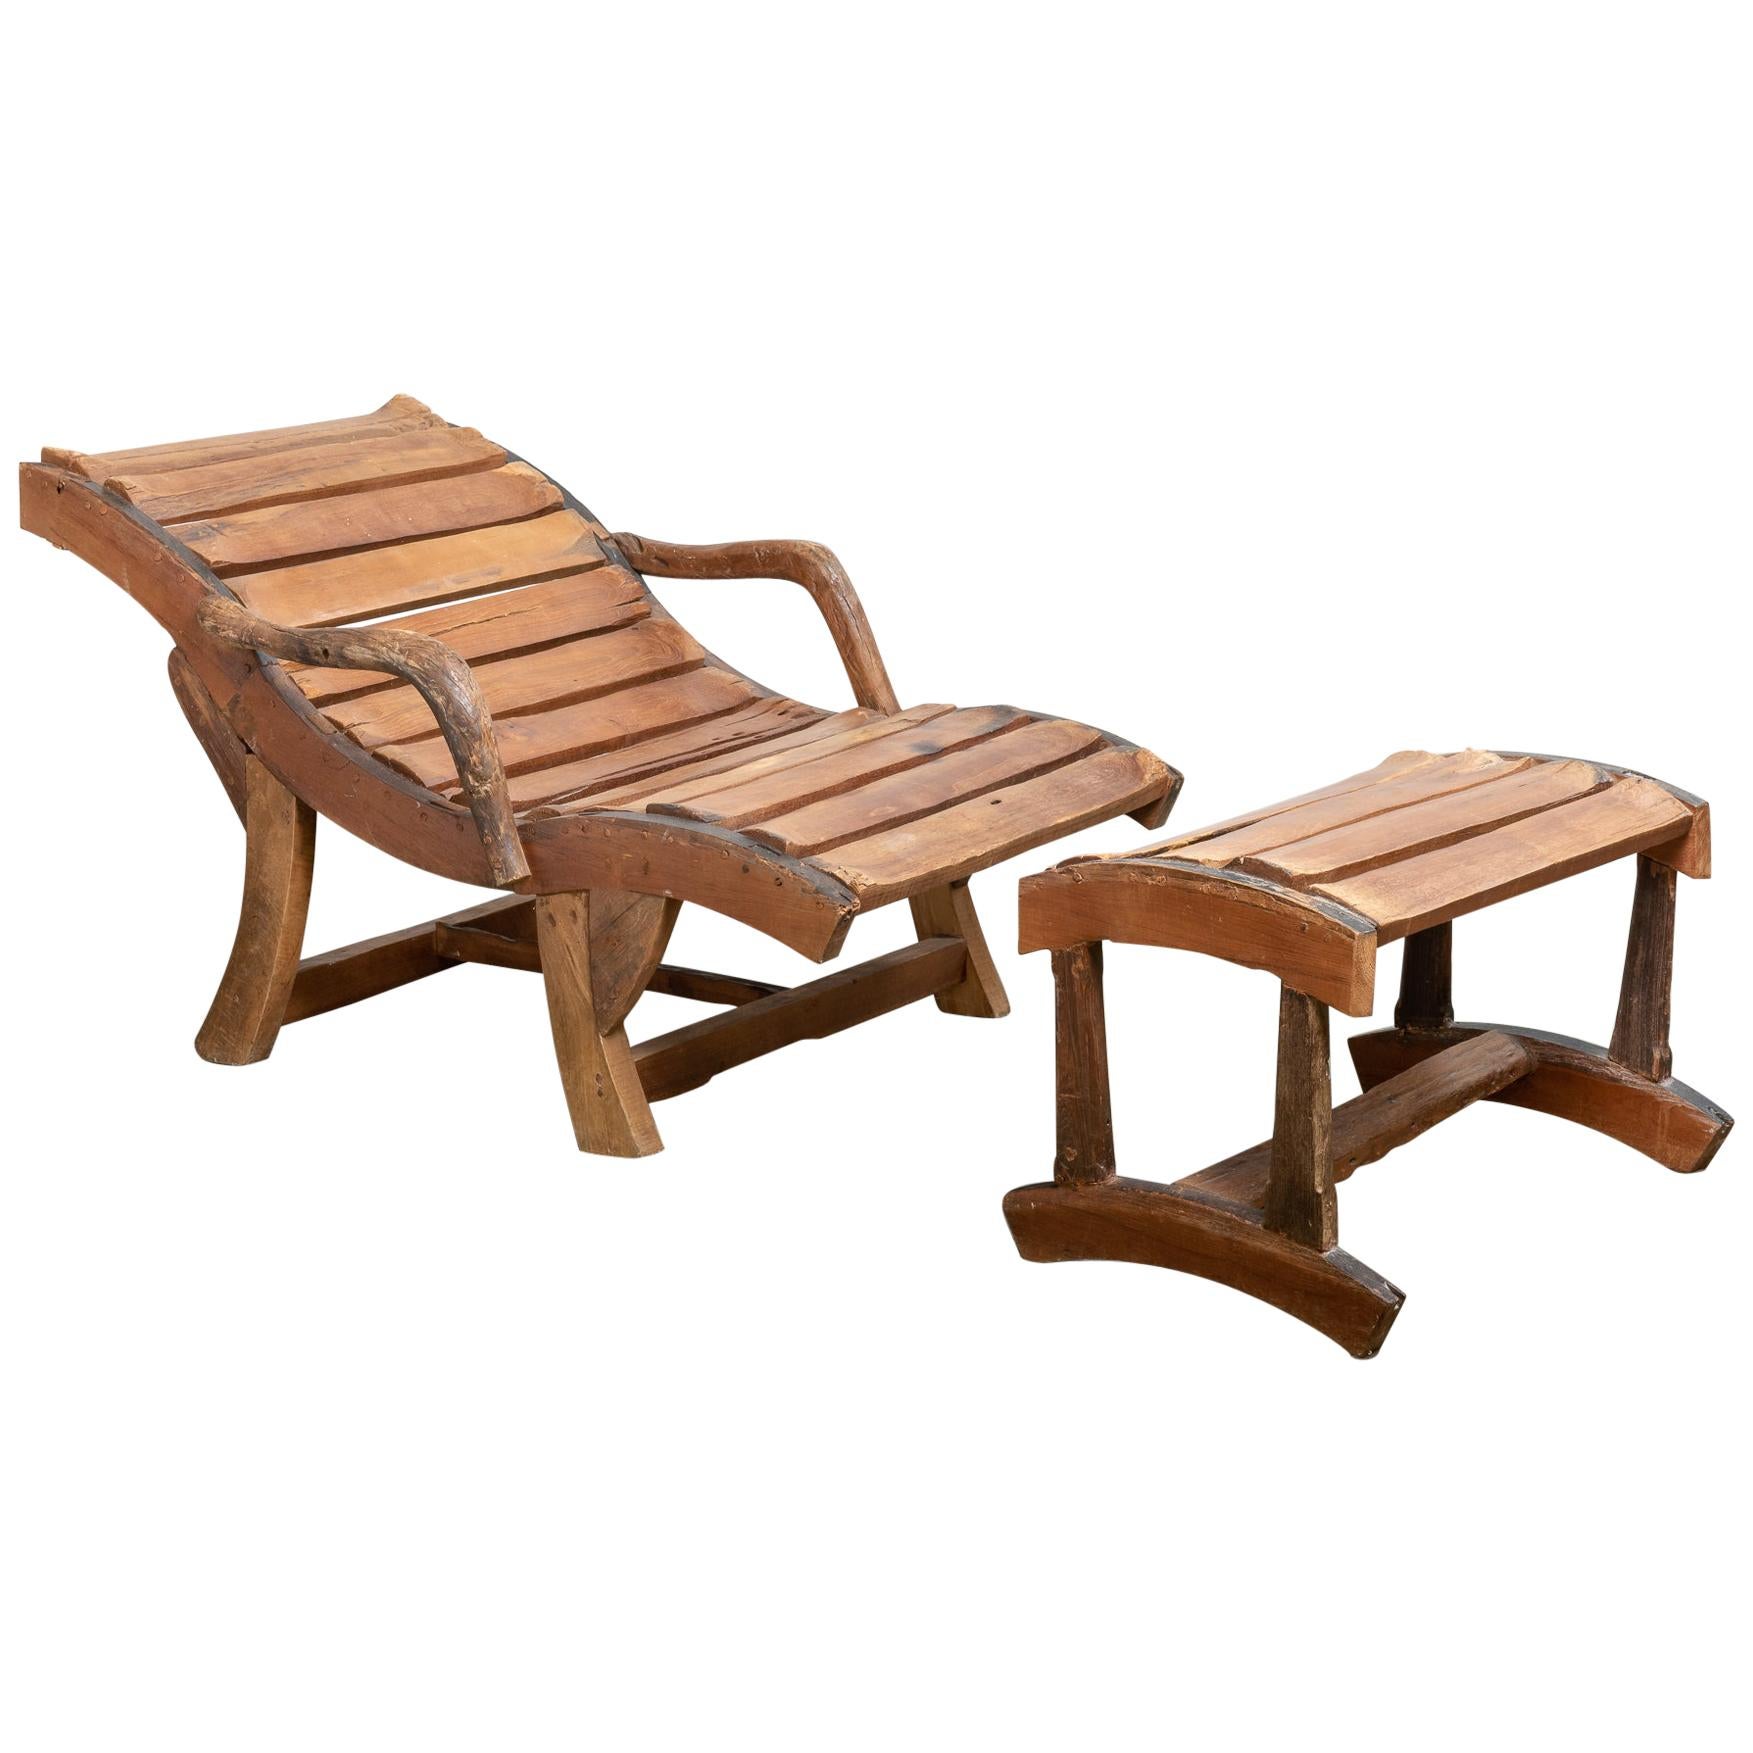 Wooden Lounge Chair with Foot Support